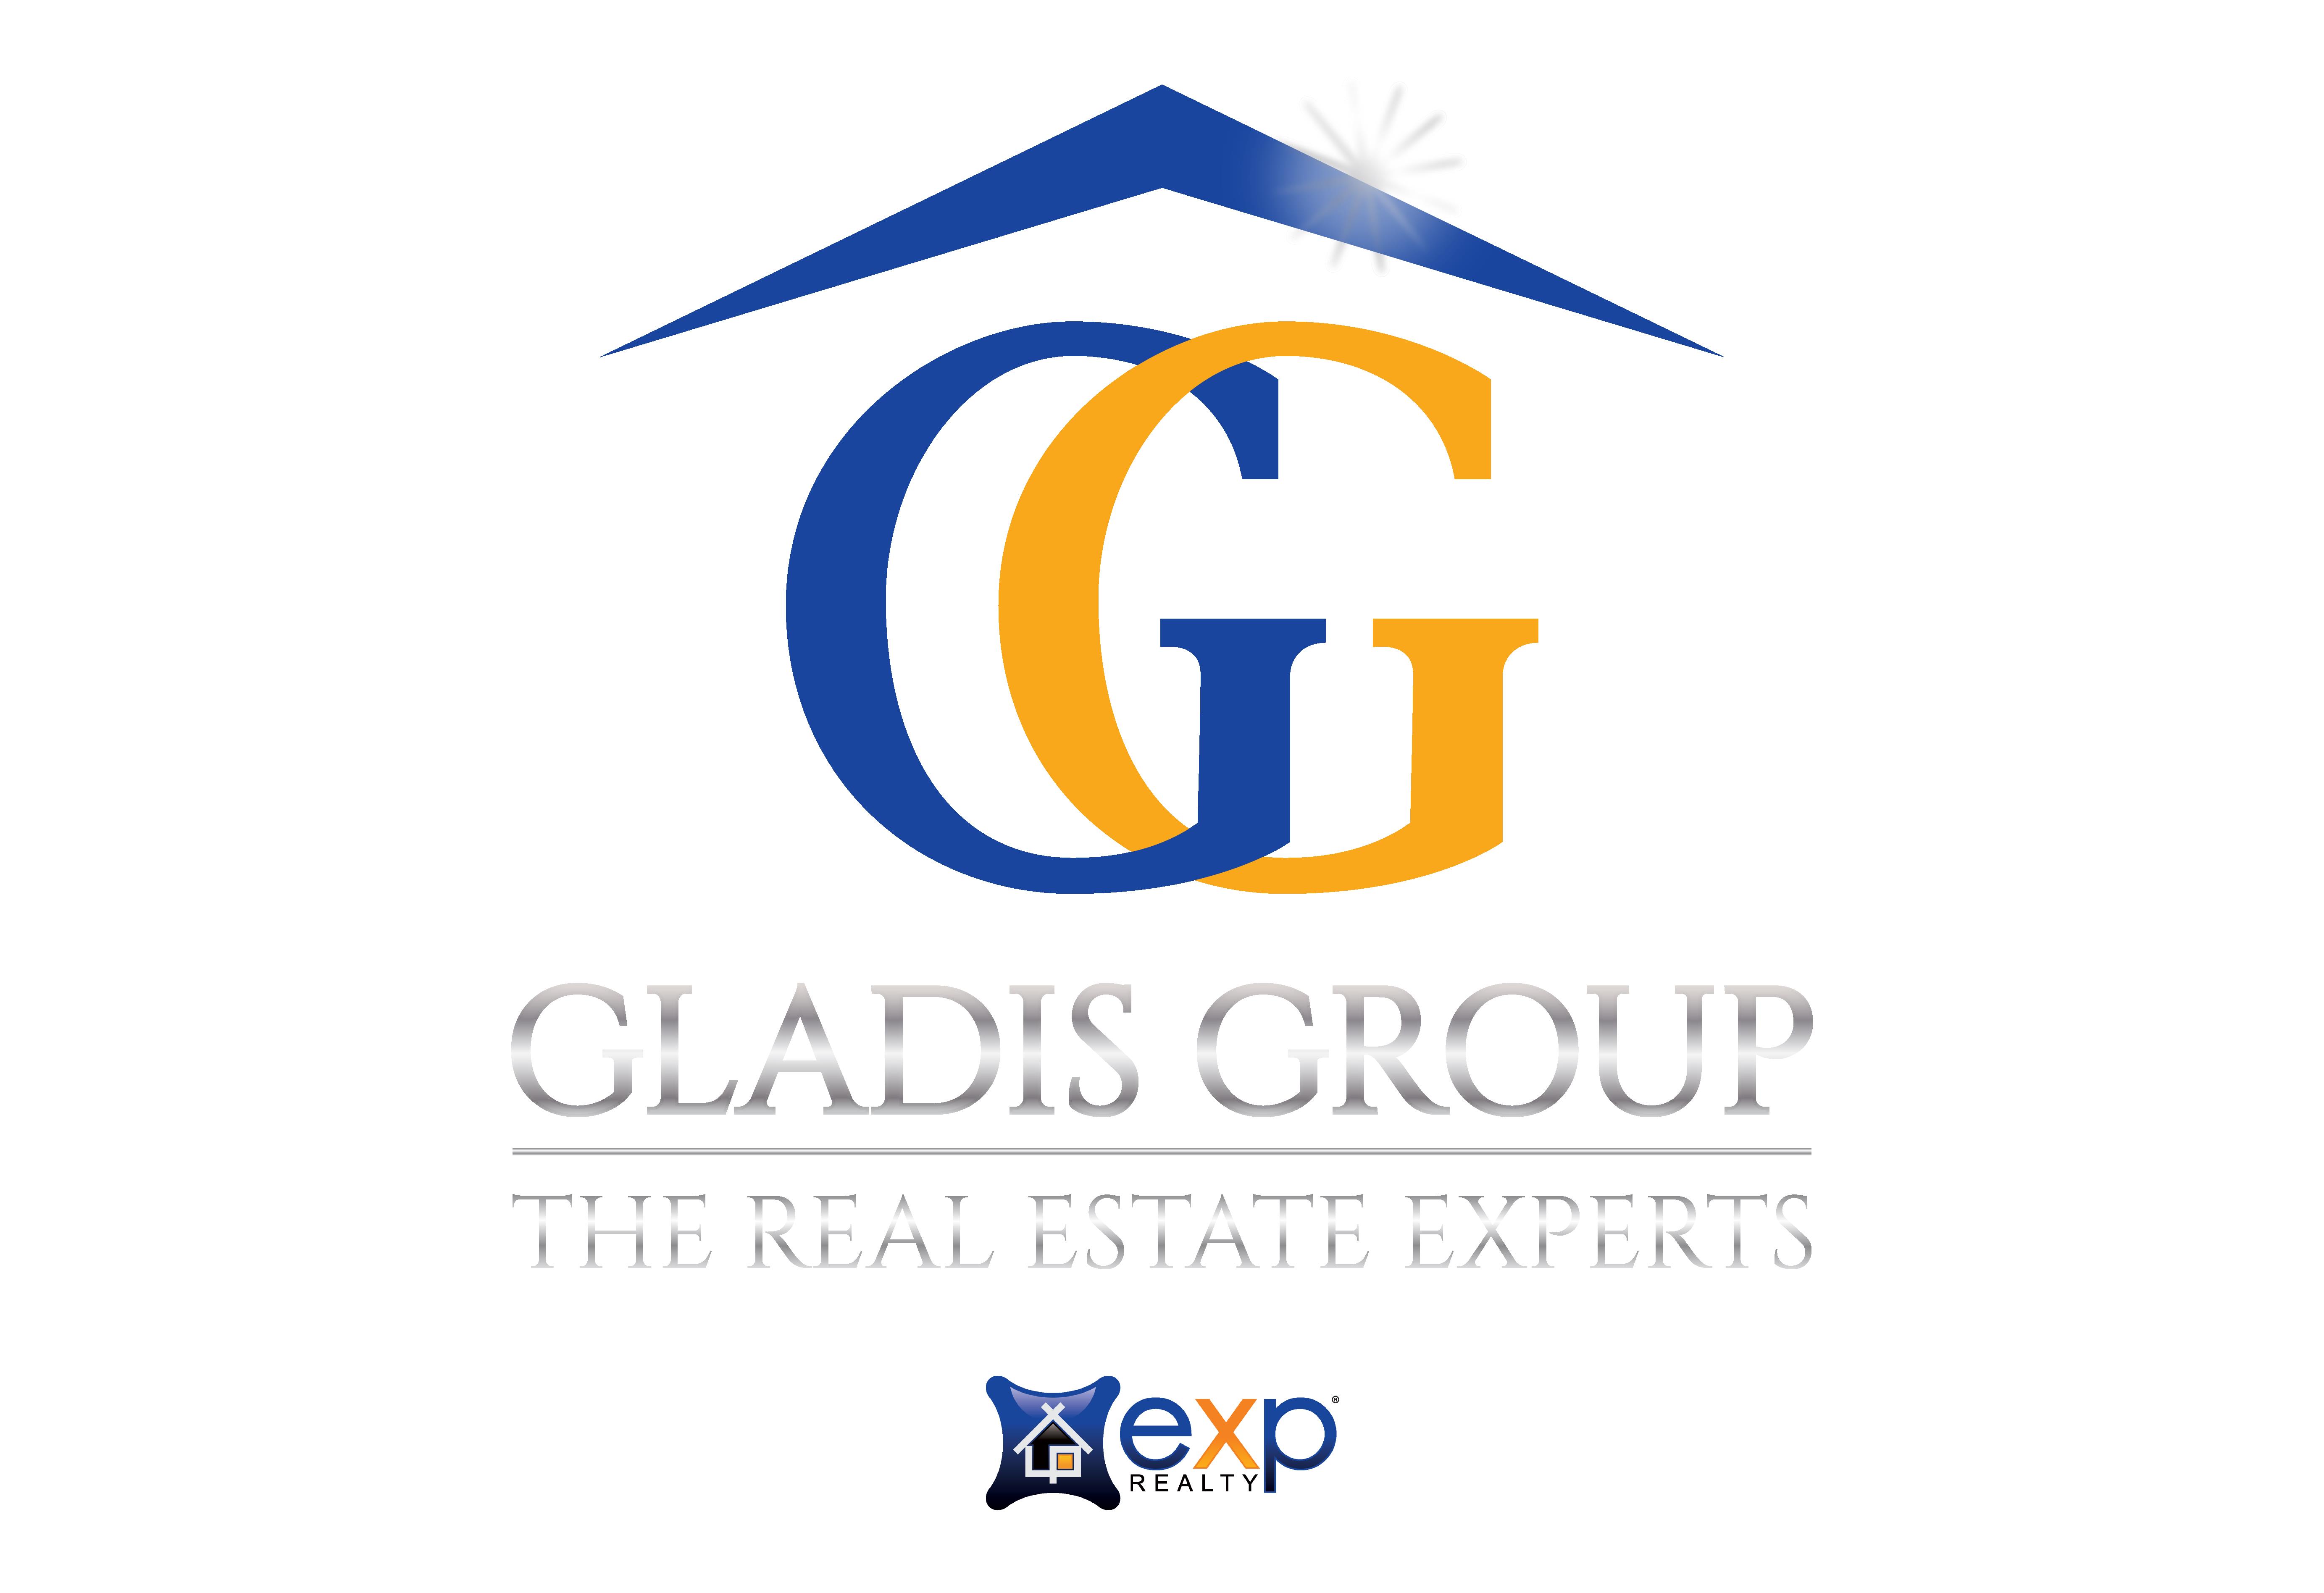 Gina Gladis Group with eXp Realty